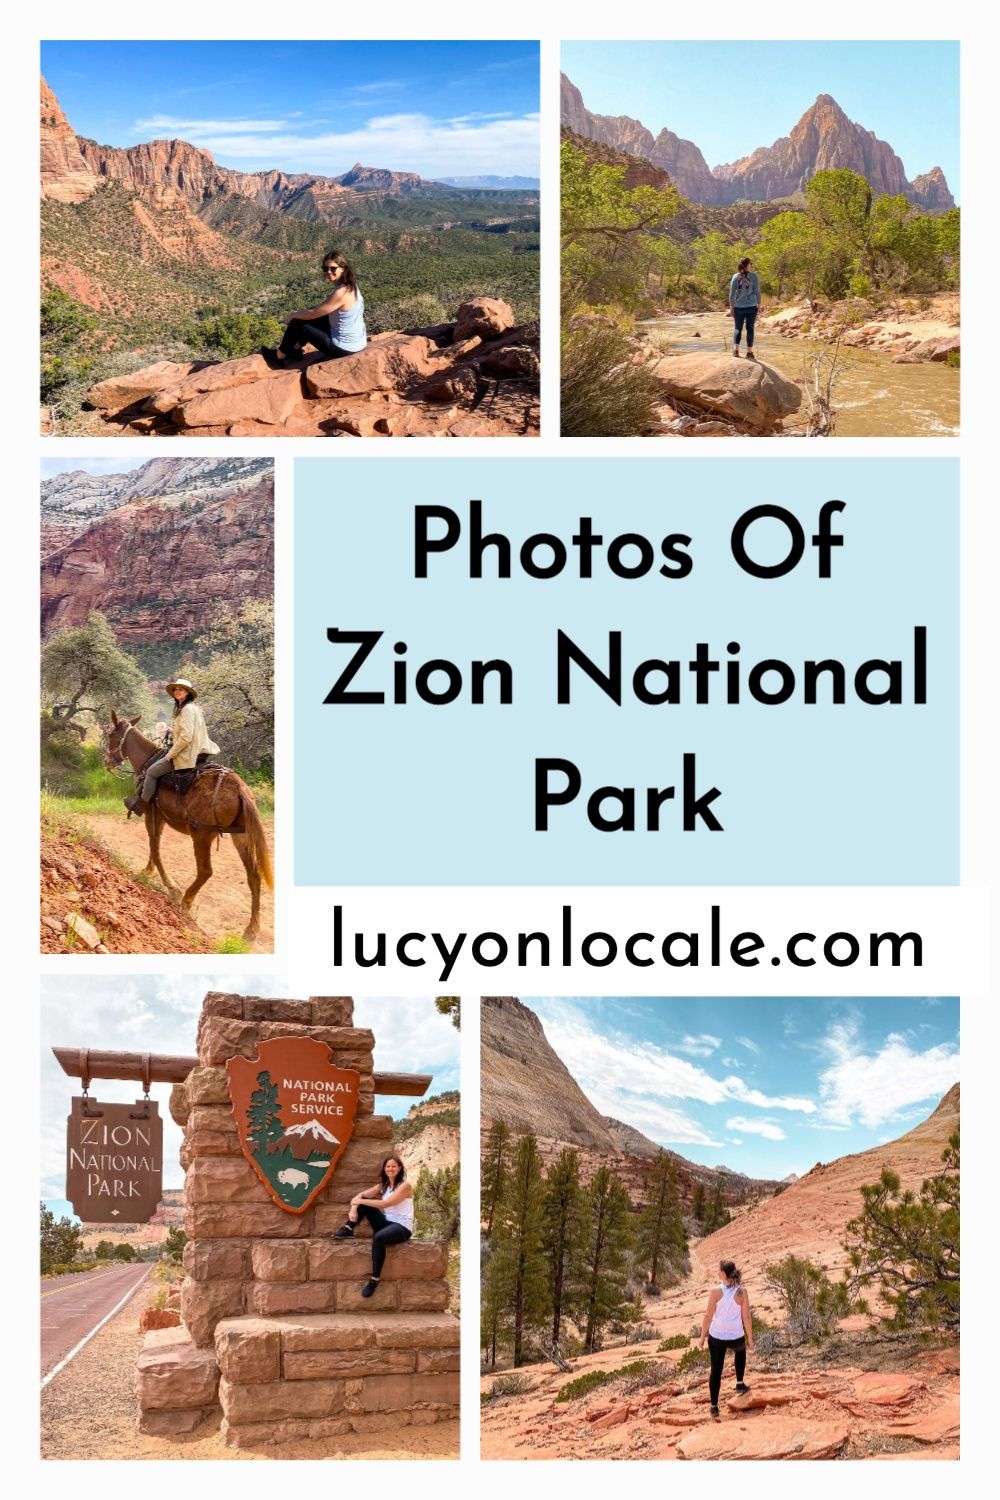 photos of Zion National Park